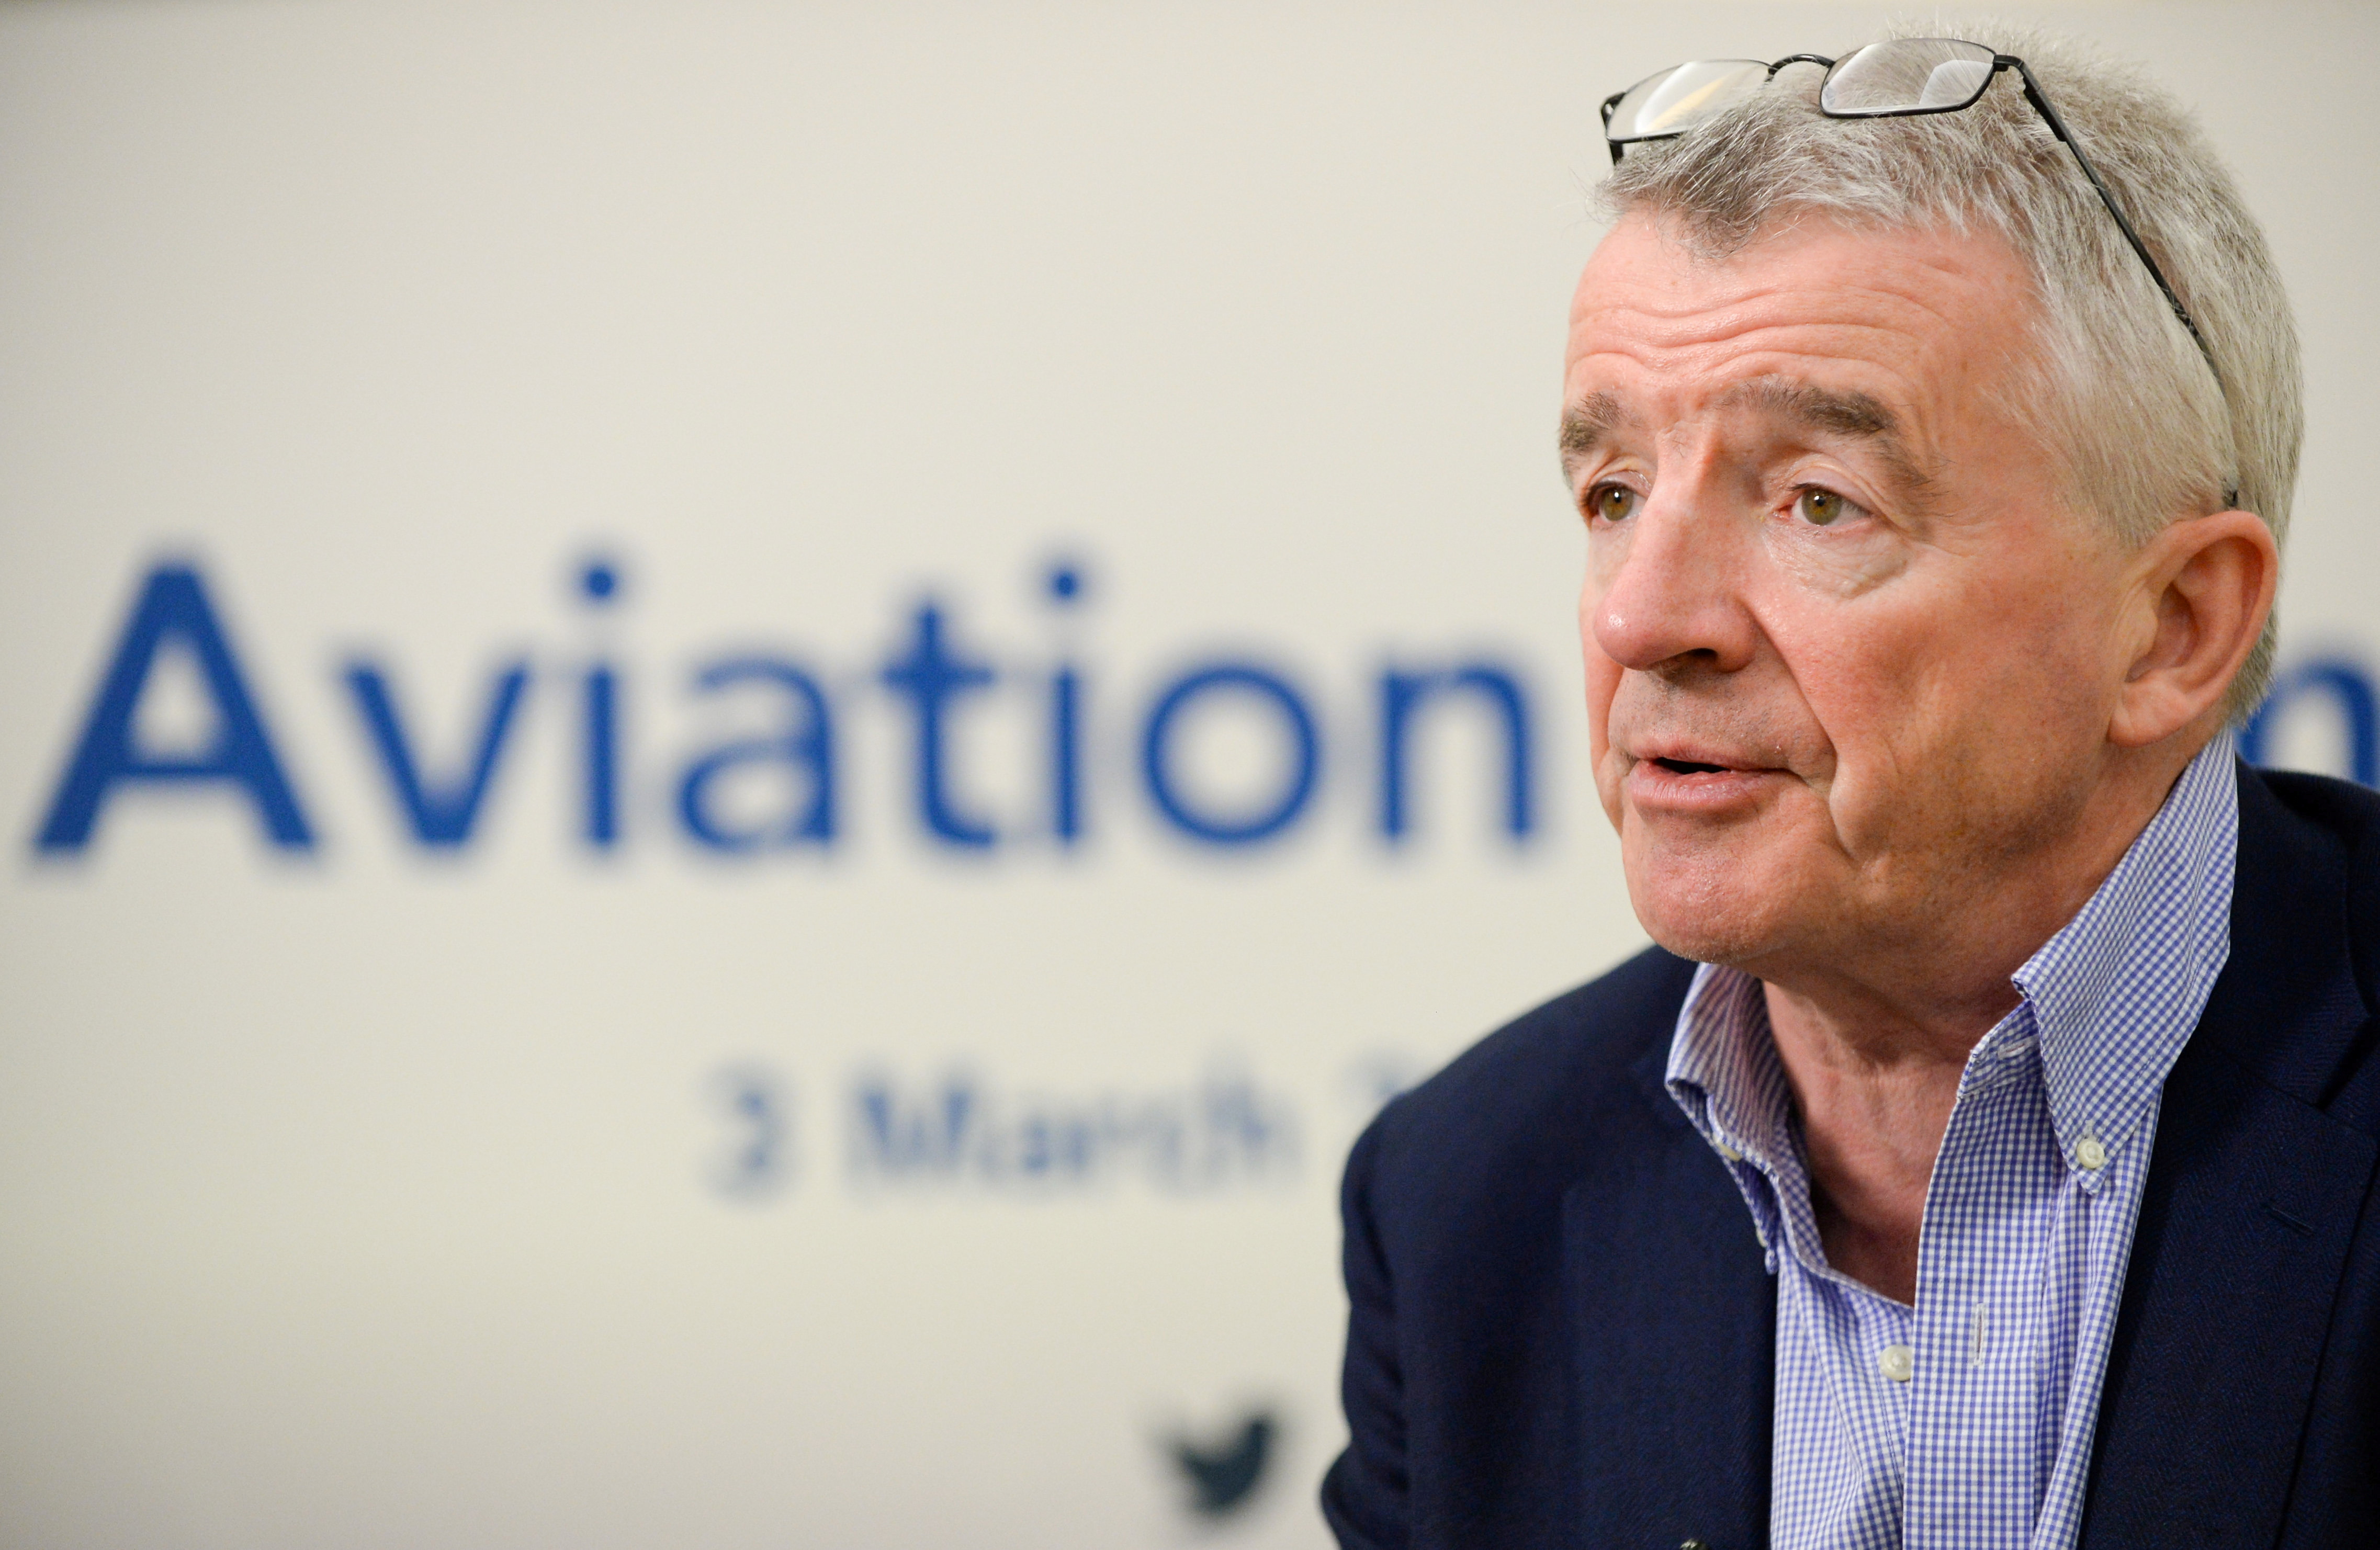 Ryanair GGroup Chief Executive Michael O'Leary attends the Europe Aviation Summit in Brussels